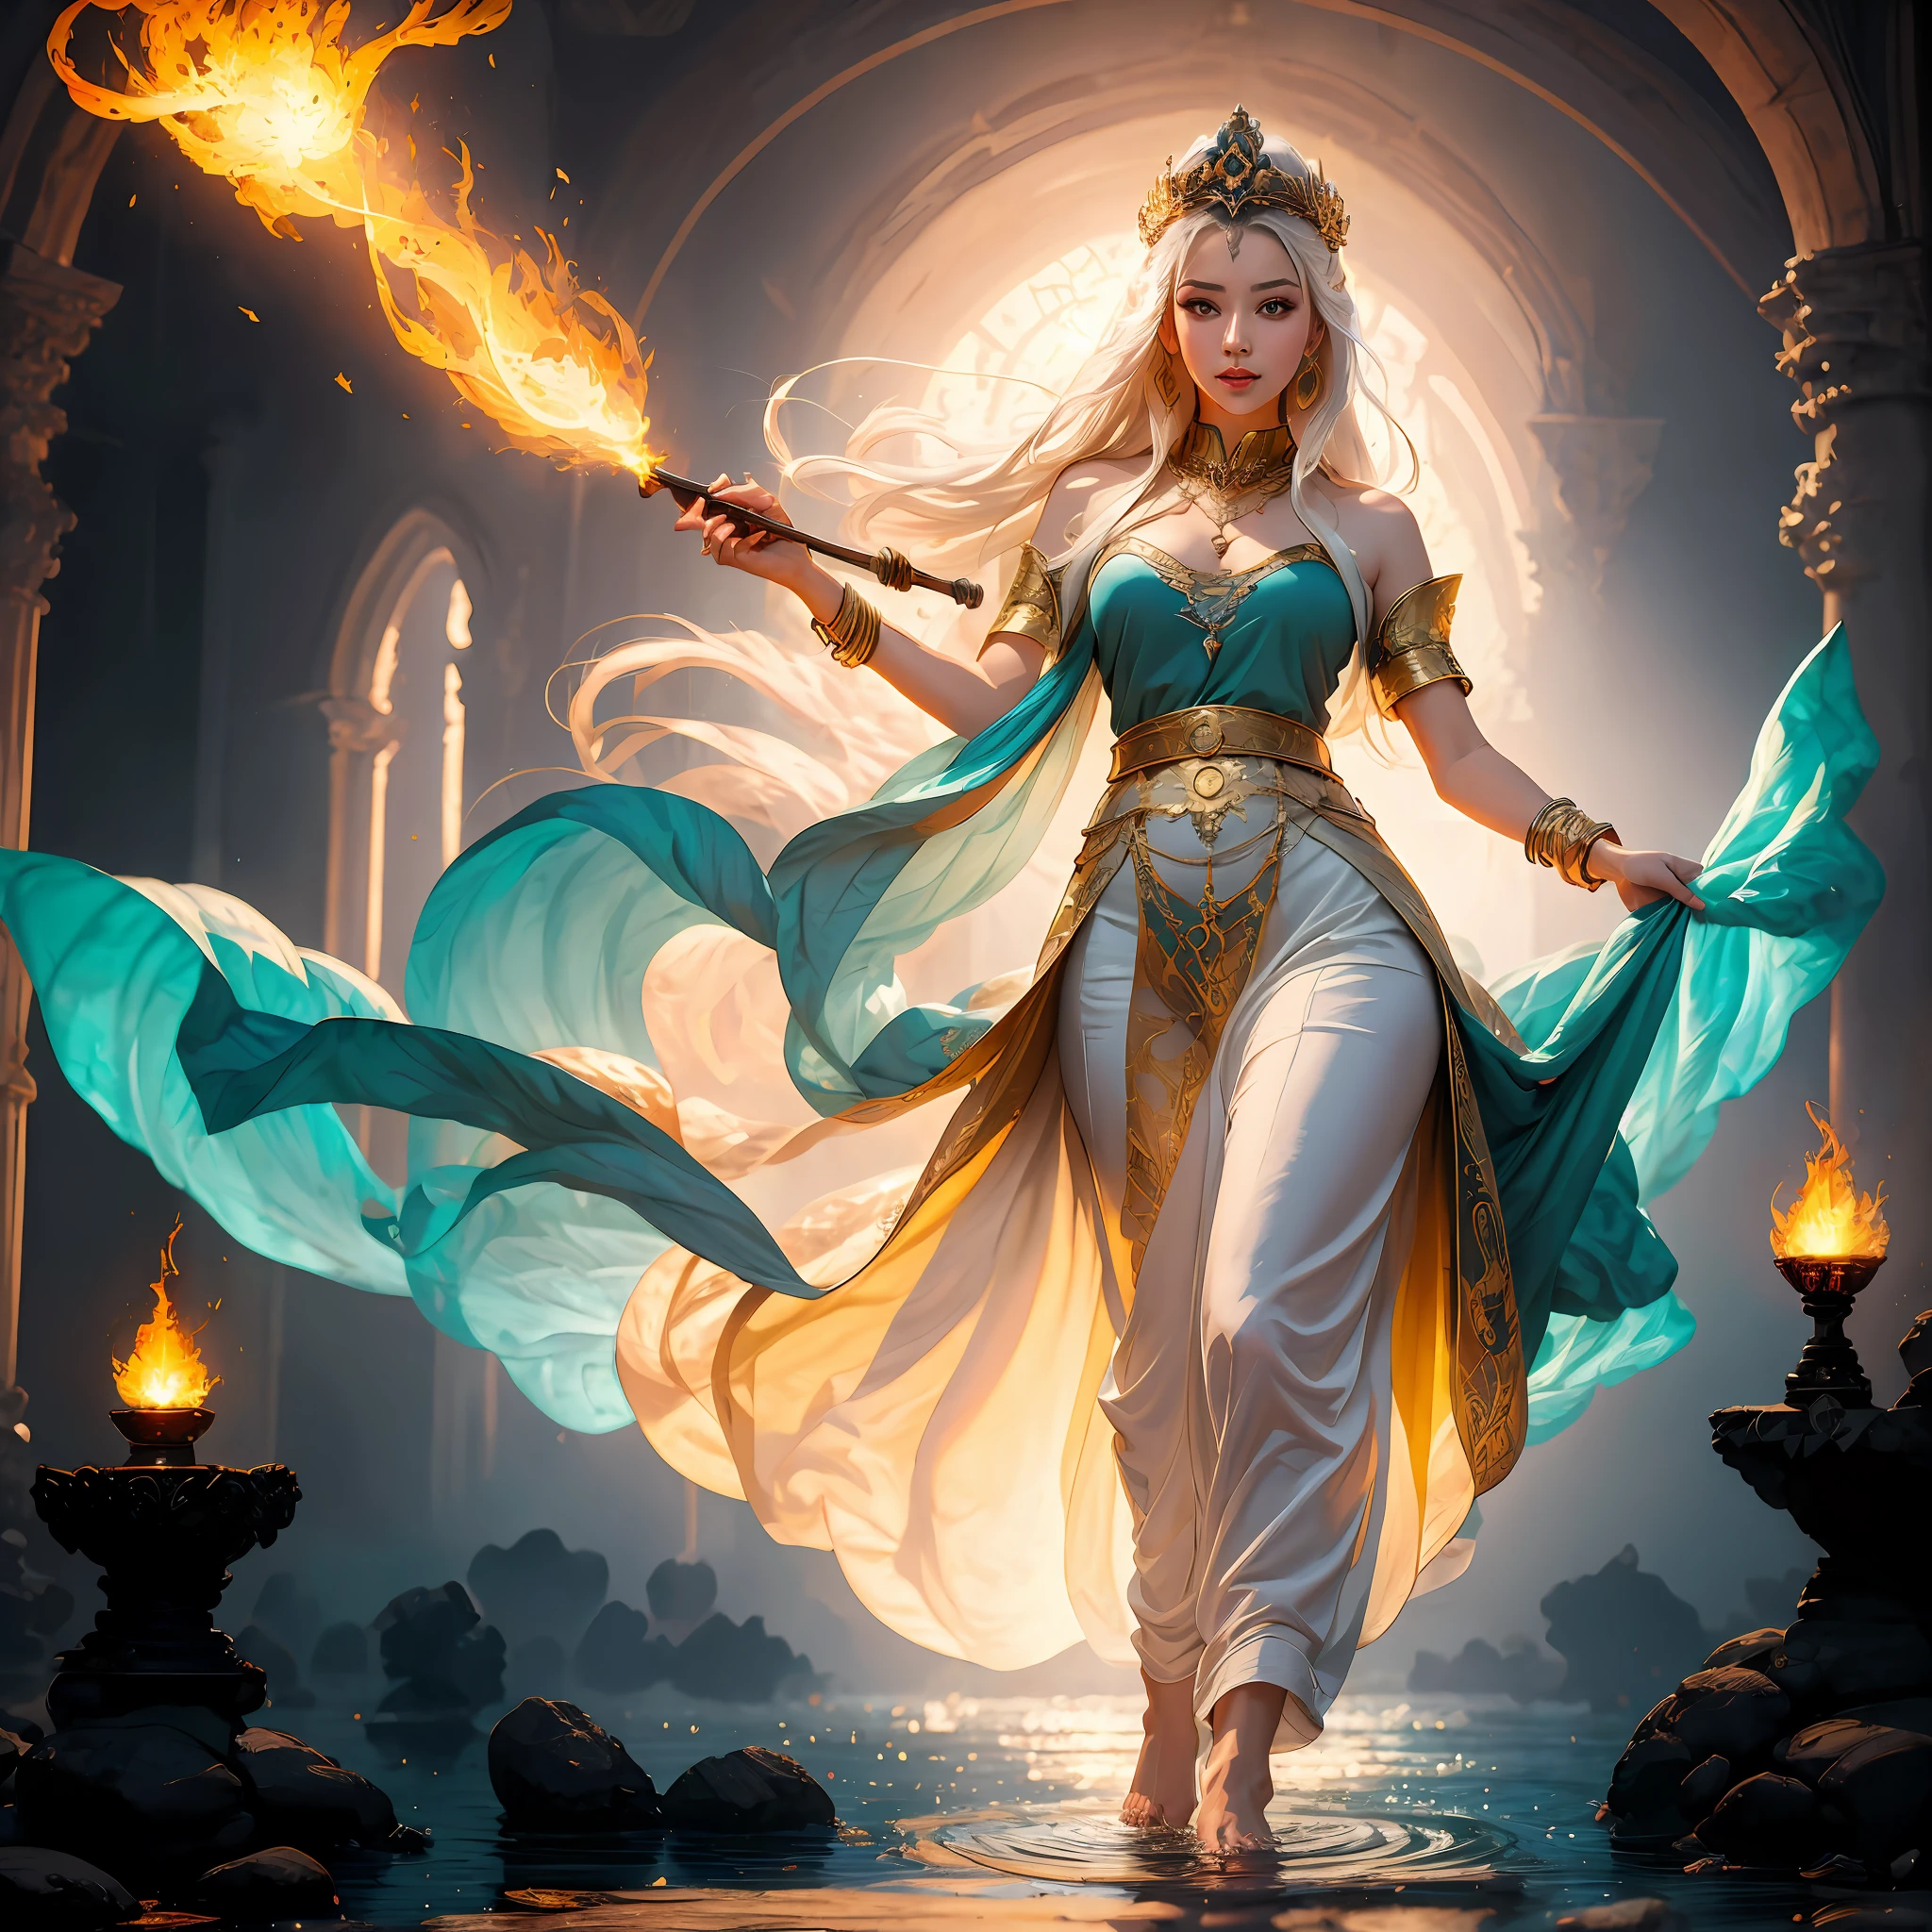 A woman in bizarre costume holding a fiery wand，Full close-up, Standing barefoot in a disc on the water，A ring of fire around，The background is in the mysterious palace，Tall buildings，Unusually towering，Mysterious light，Mysterious atmosphere，oil lamp，Red flames behind him，Art germ on ArtStation Pixiv, Goddess of Light, IG model | Art germ, anime goddess, beautiful celestial mage, white haired deity, cushart krenz key art feminine, a beautiful fantasy empress, concept arts | Art germ, Artgerm style